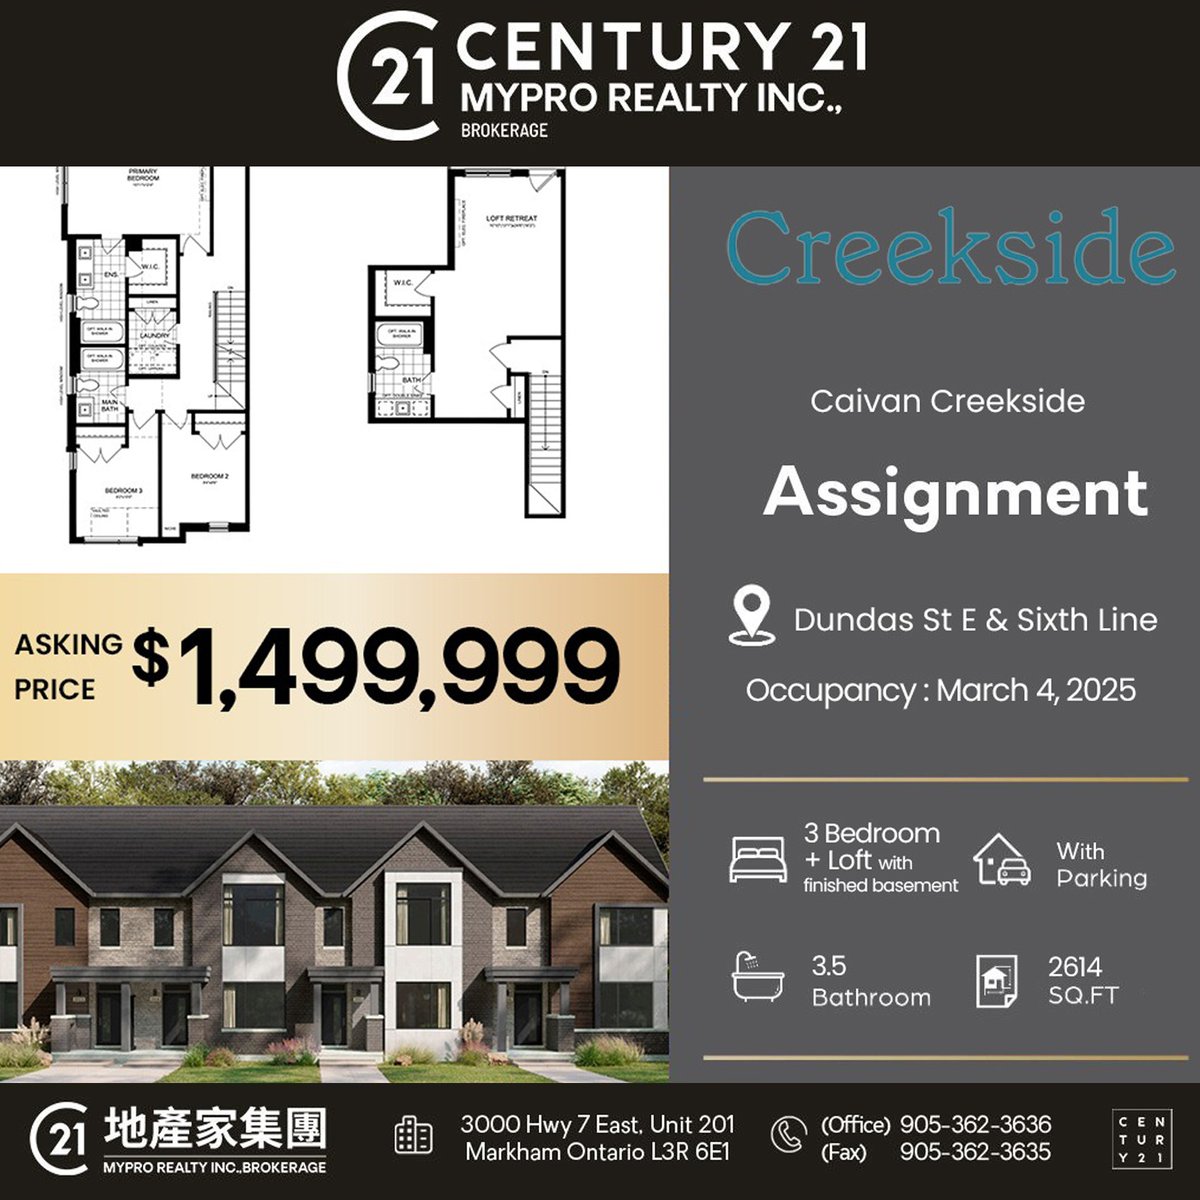 🌟 Caivan Creekside Assignment! 🌟 💰Asking $1,499,999 📍Sixth Line & Dundas St E 🔑 3 Bed + Loft, 3.5 Bath, Finished Bsmt 🗓️ Occupancy March 2025 📐2614 sq.ft 🚗 With Parking 🤝Commission 2.5% #RealEstateInvestment #AssignmentSale #PropertyOpportunity #TorontoRealEstate